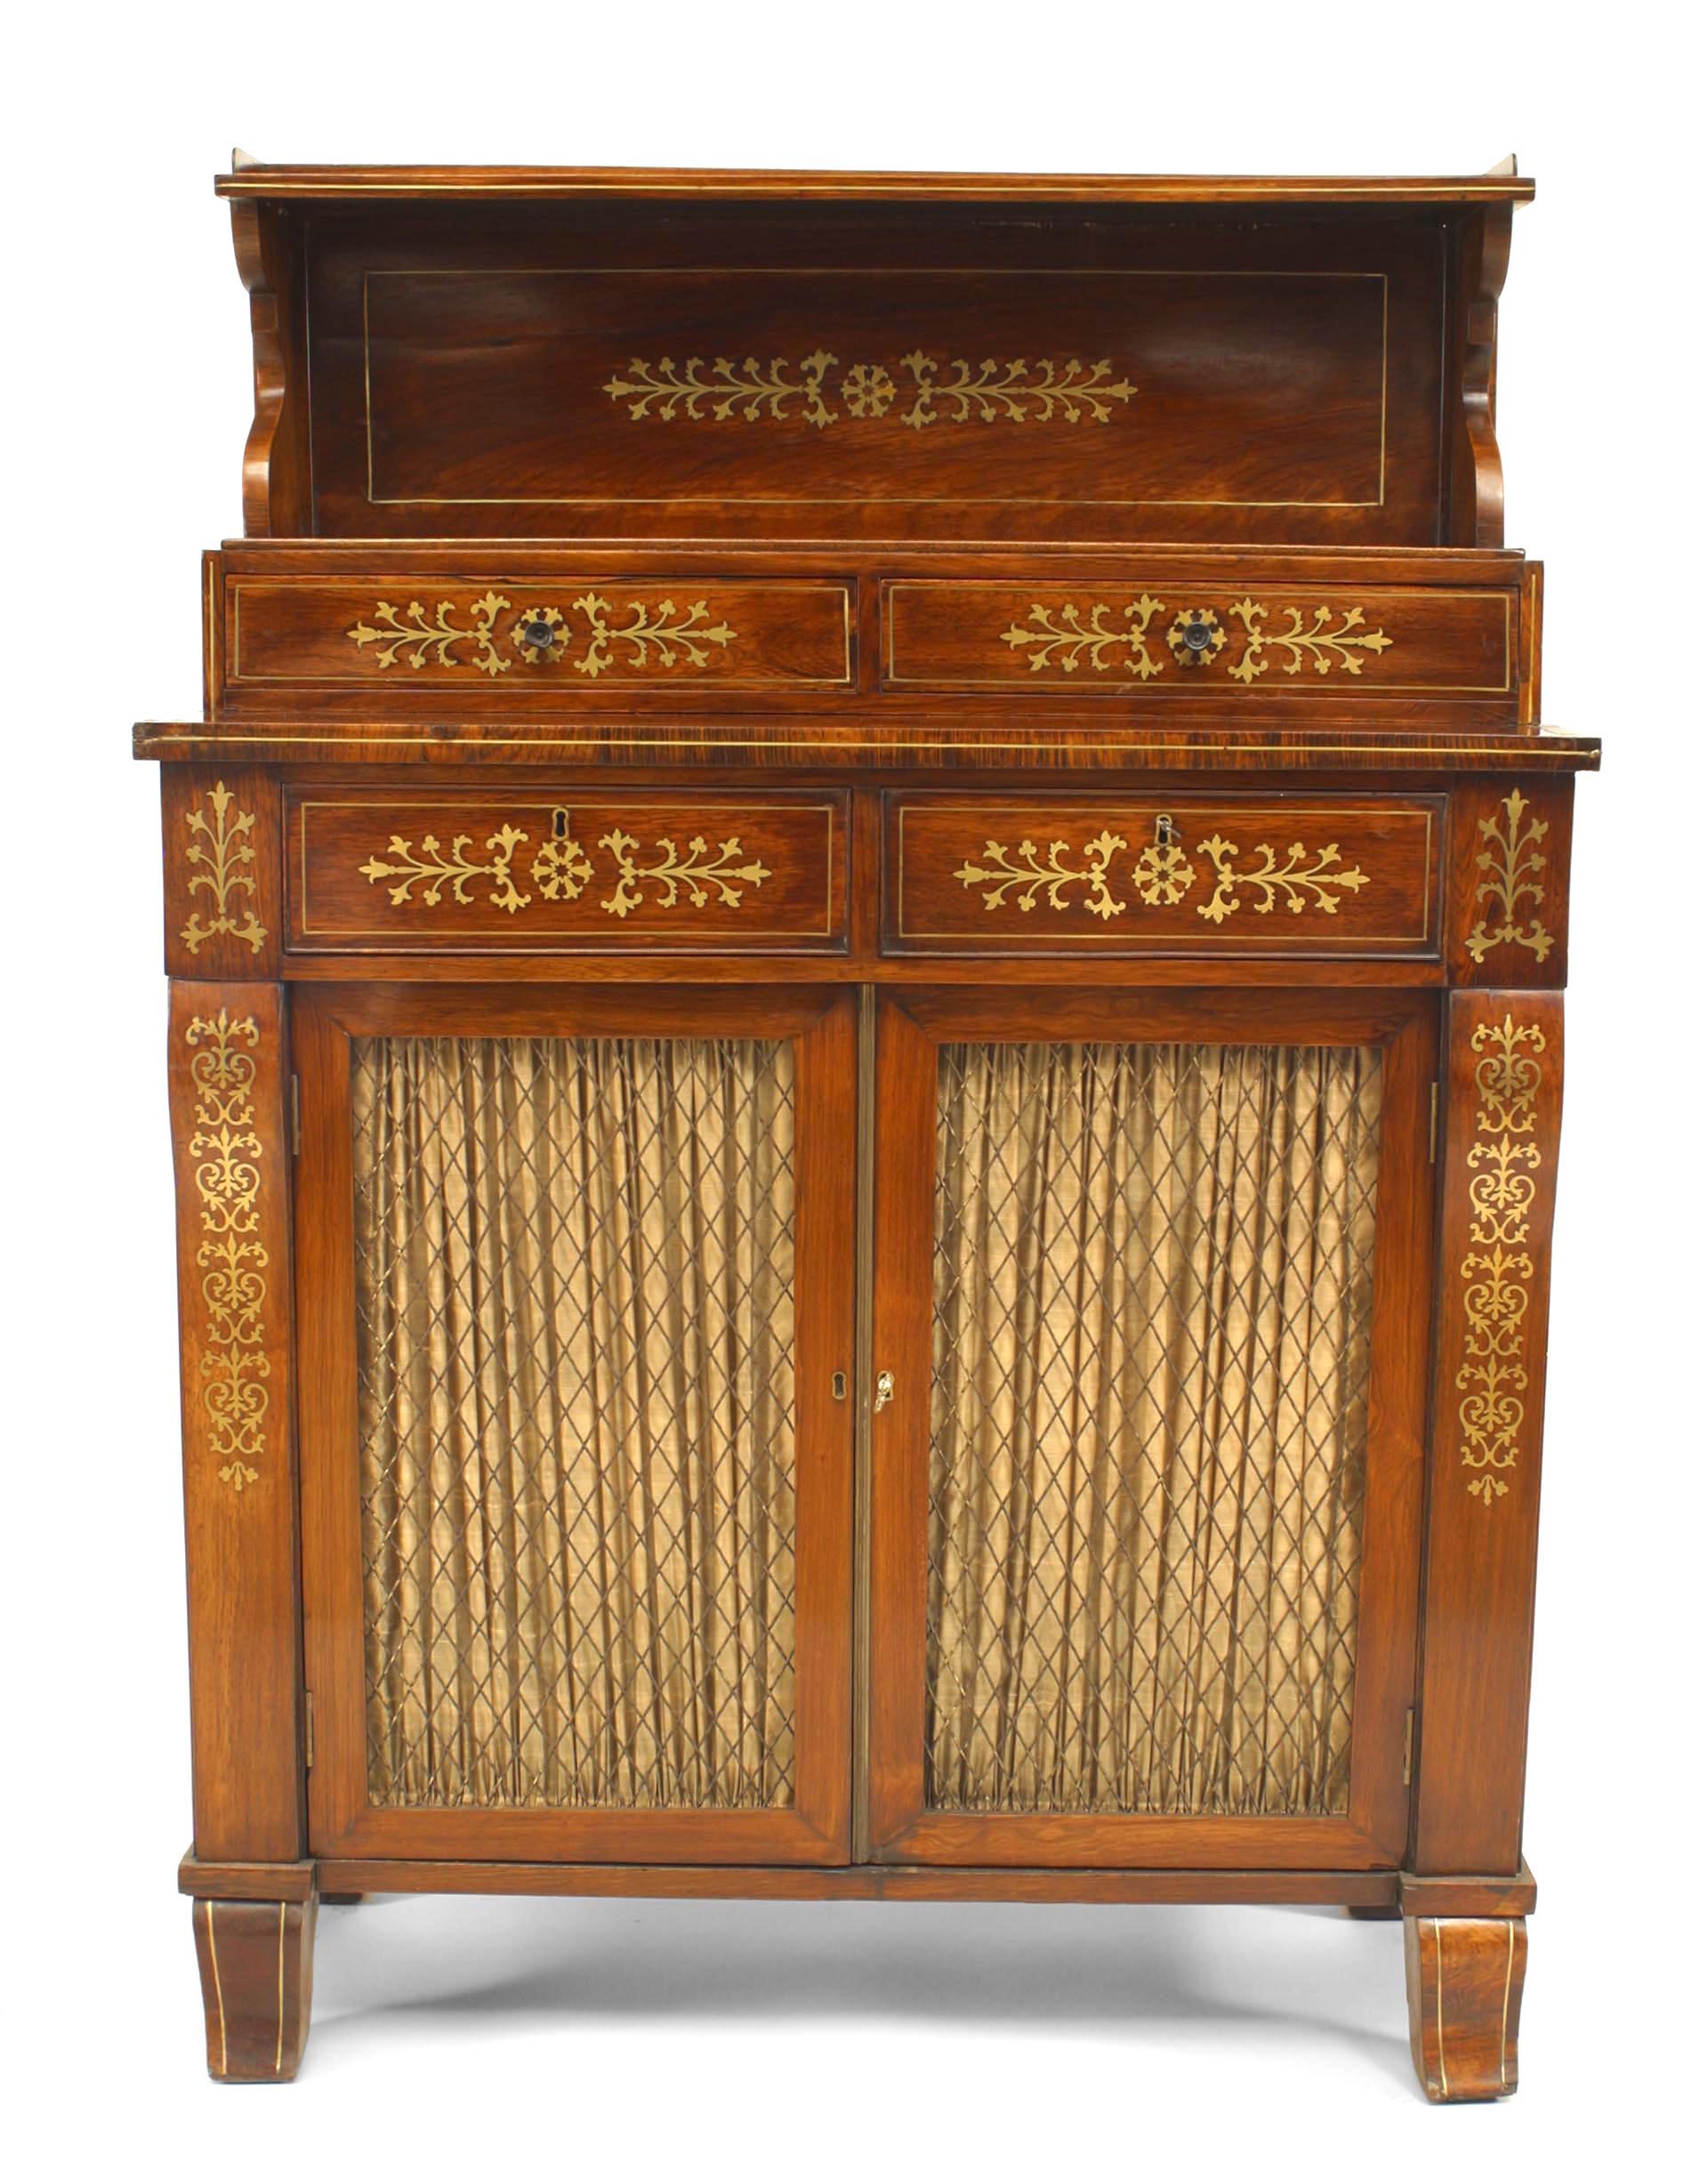 English Regency mahogany and brass inlaid 2 drawer small sideboard cabinet with 2 grill doors and upper section.
